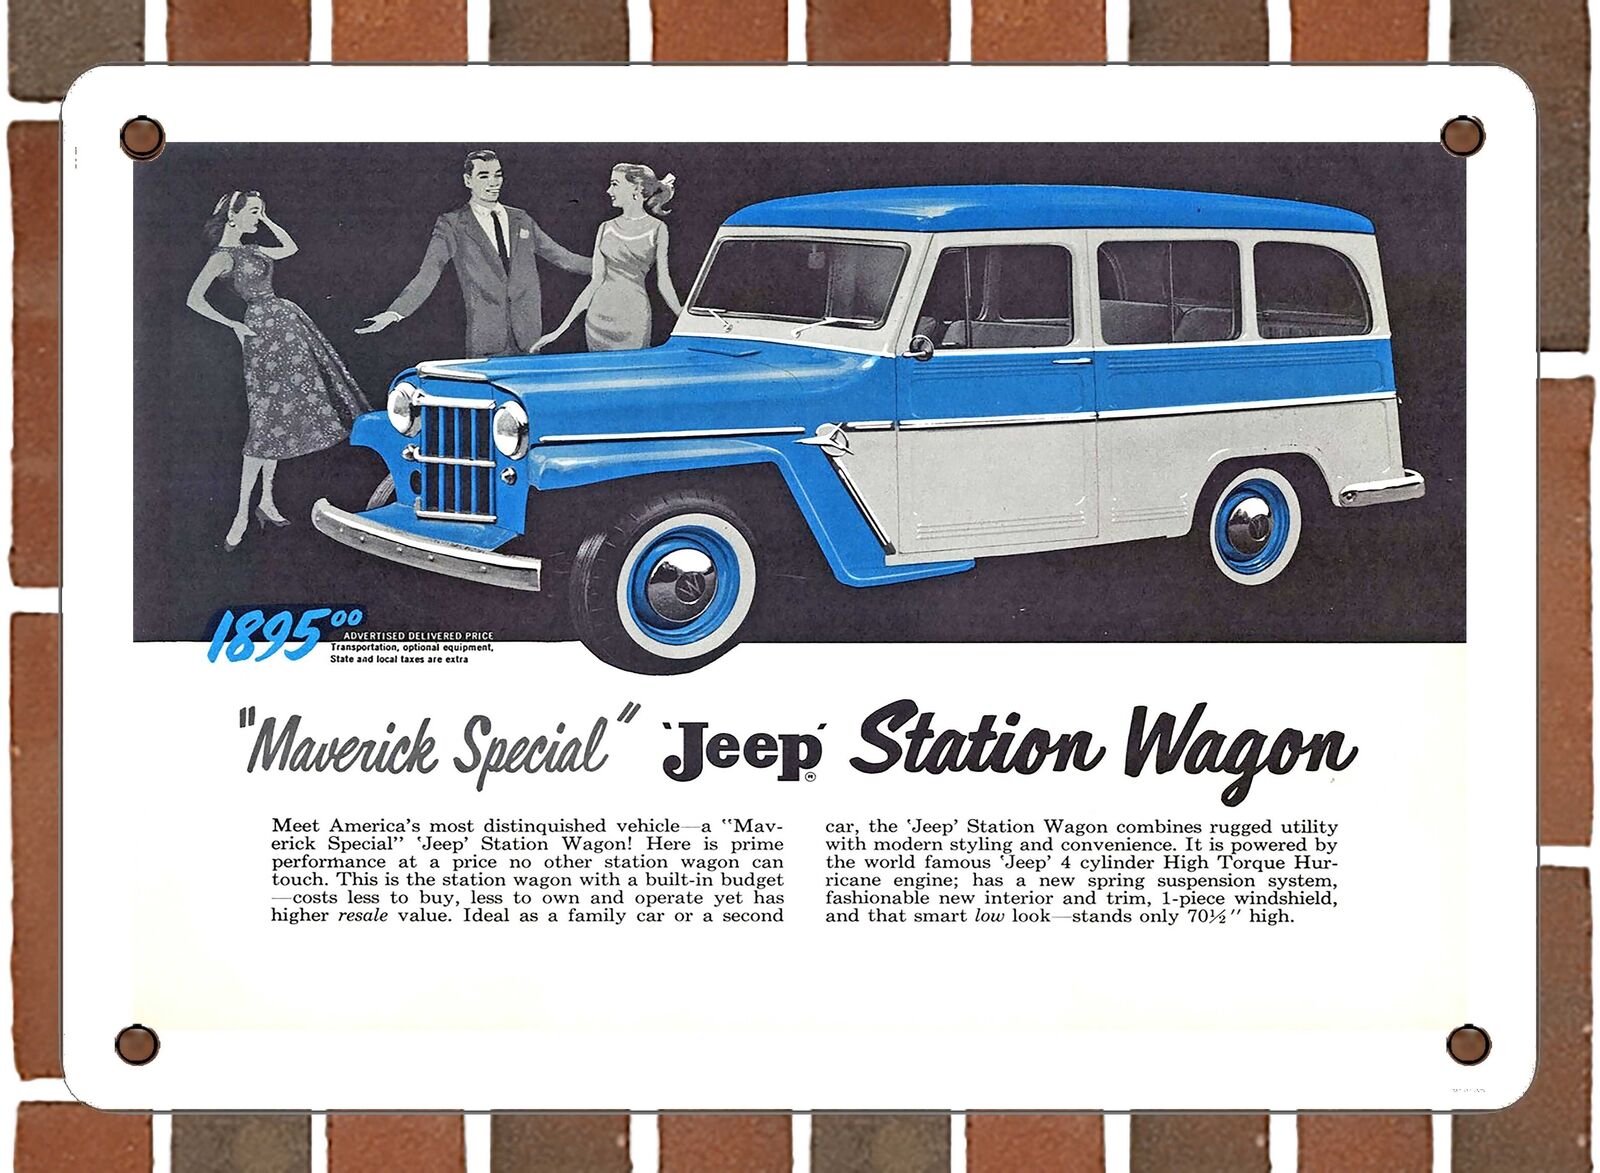 METAL SIGN - 1958 Willys Jeeps Maverick Special Station Wagon - 10x14 Inches